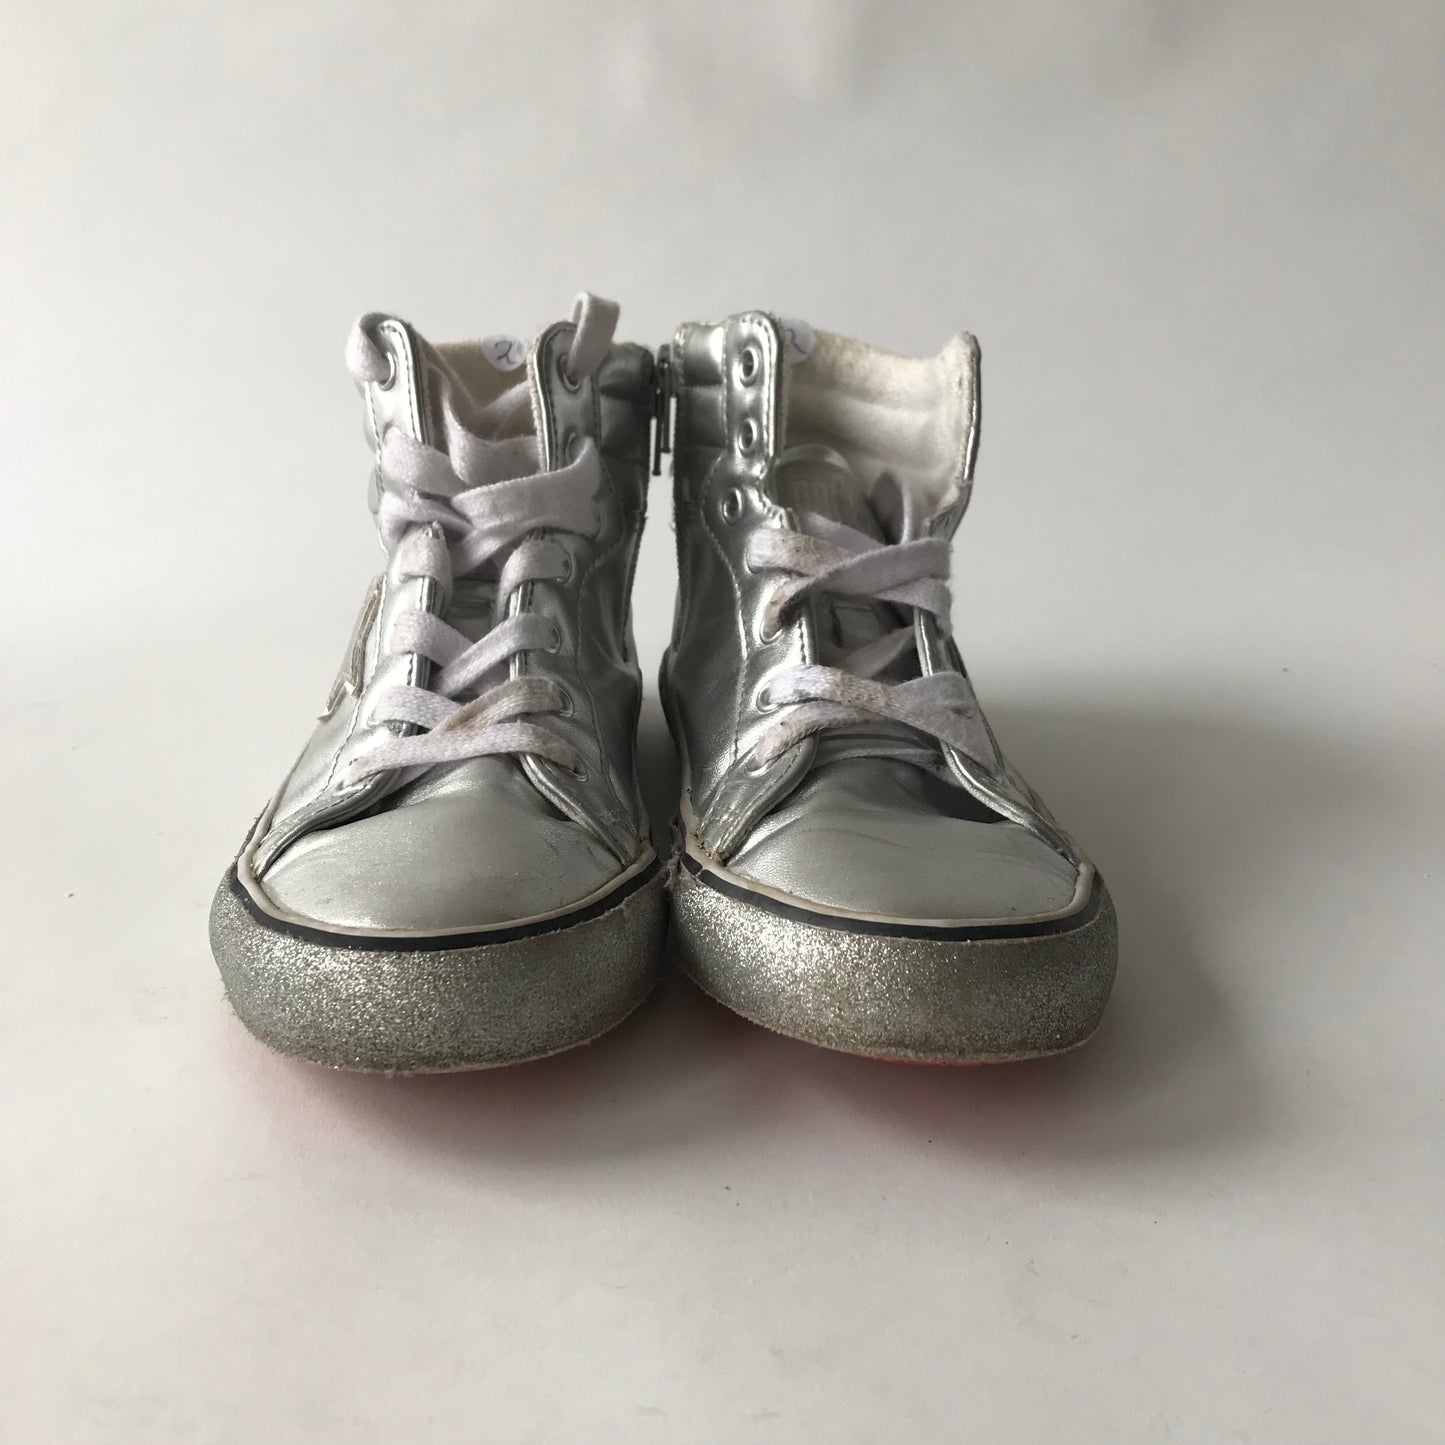 Silver High Tops Trainers Shoe Size 2